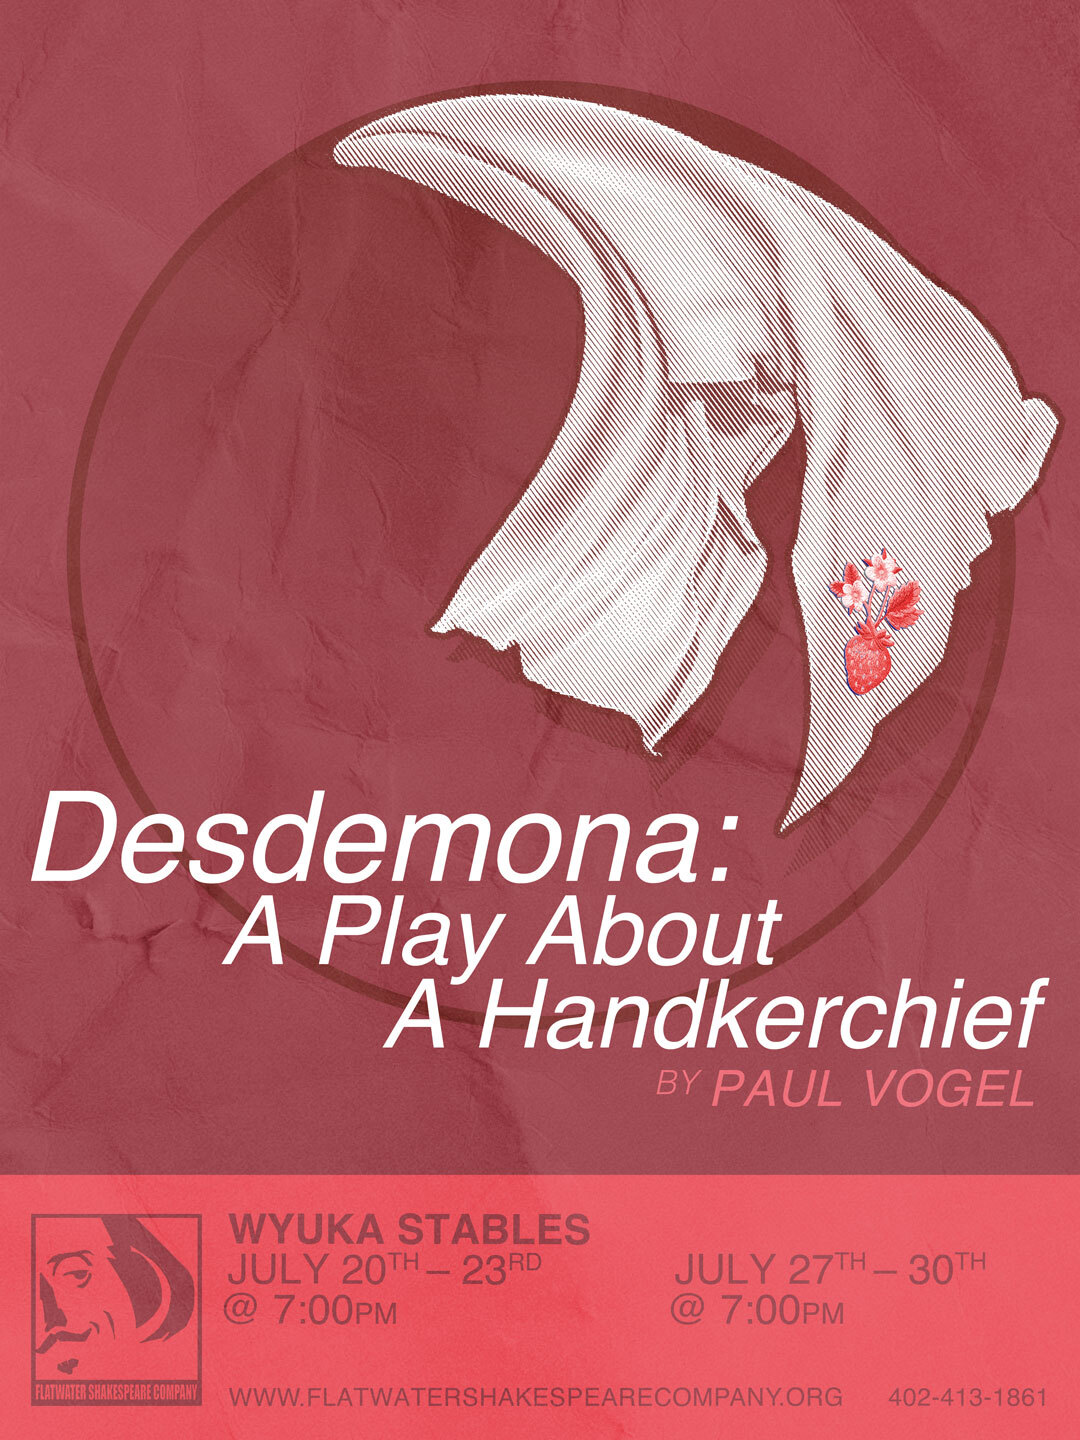 7/22 ADU - ADULT: Sat. July 22, 2023 | 7:00 p.m. - 10:00 p.m. CST | Wyuka Stables (Desdemona: A Play about a Handkerchief)